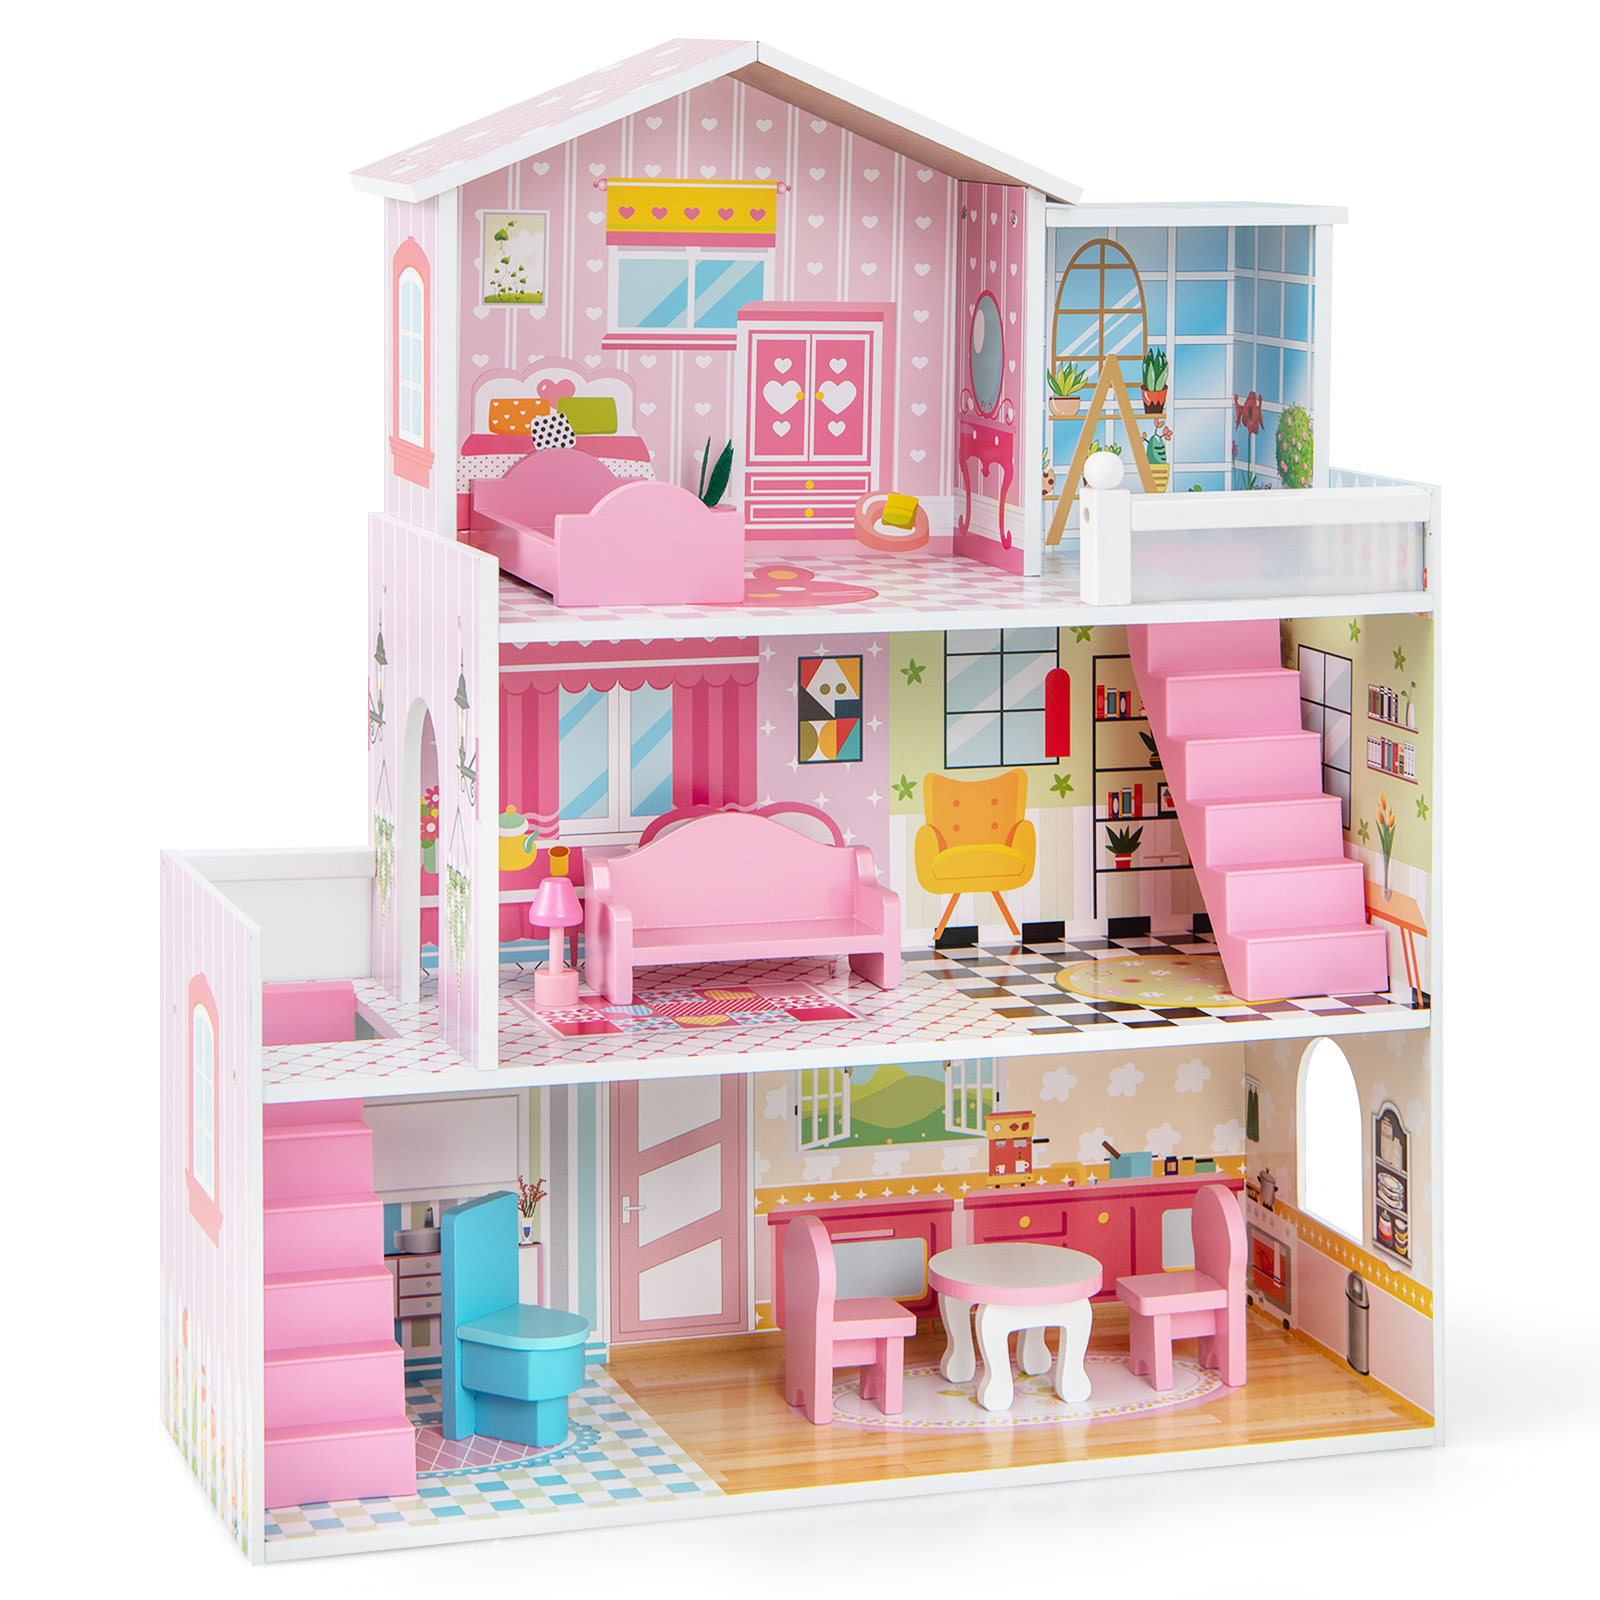 Kids Wooden Dollhouse DIY Pretend for Toddlers 3-7 Years Old-Pink